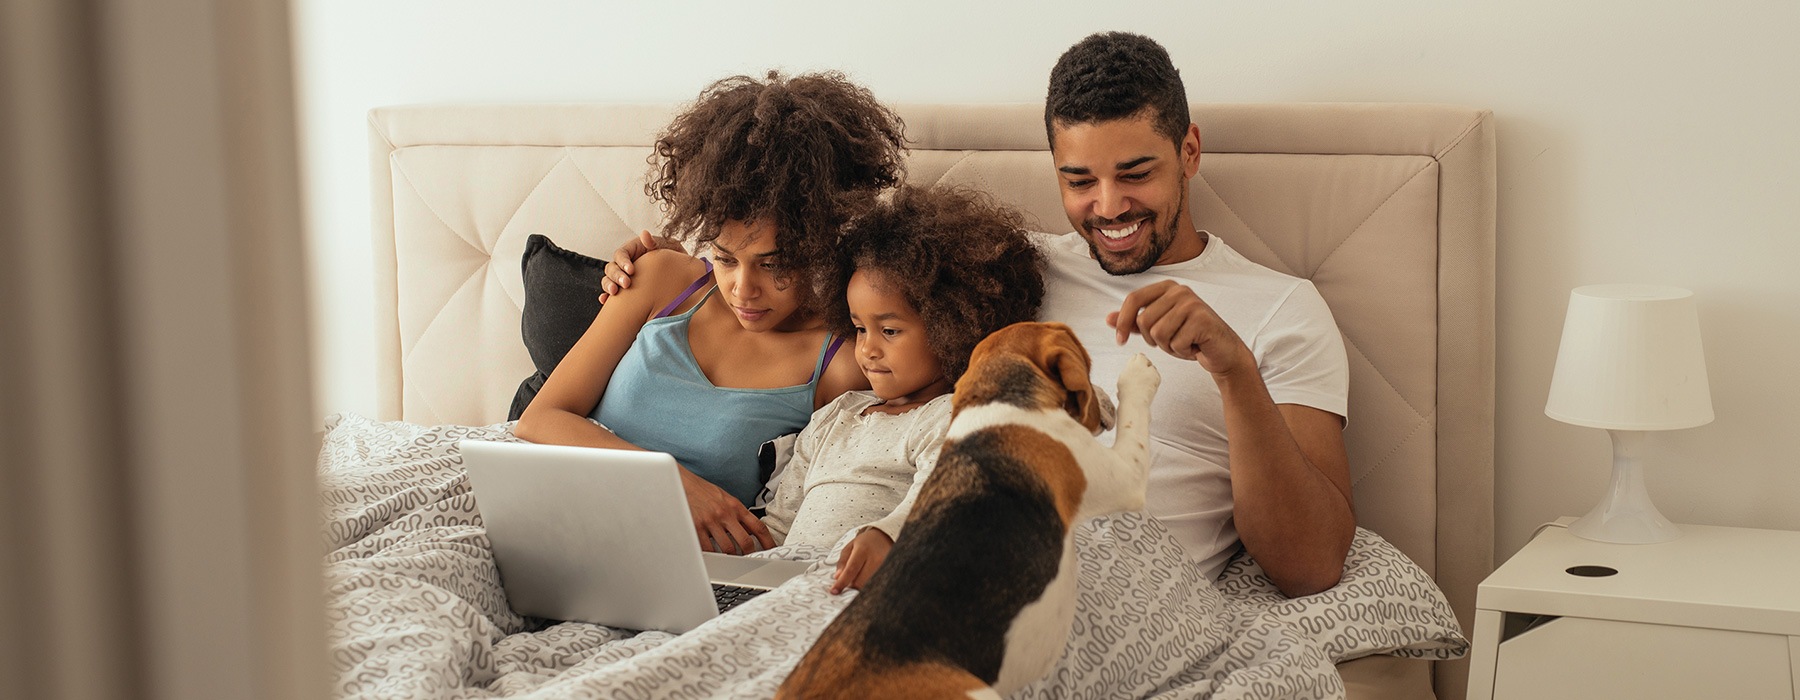 lifestyle image of a family sitting in a bed while watching something online